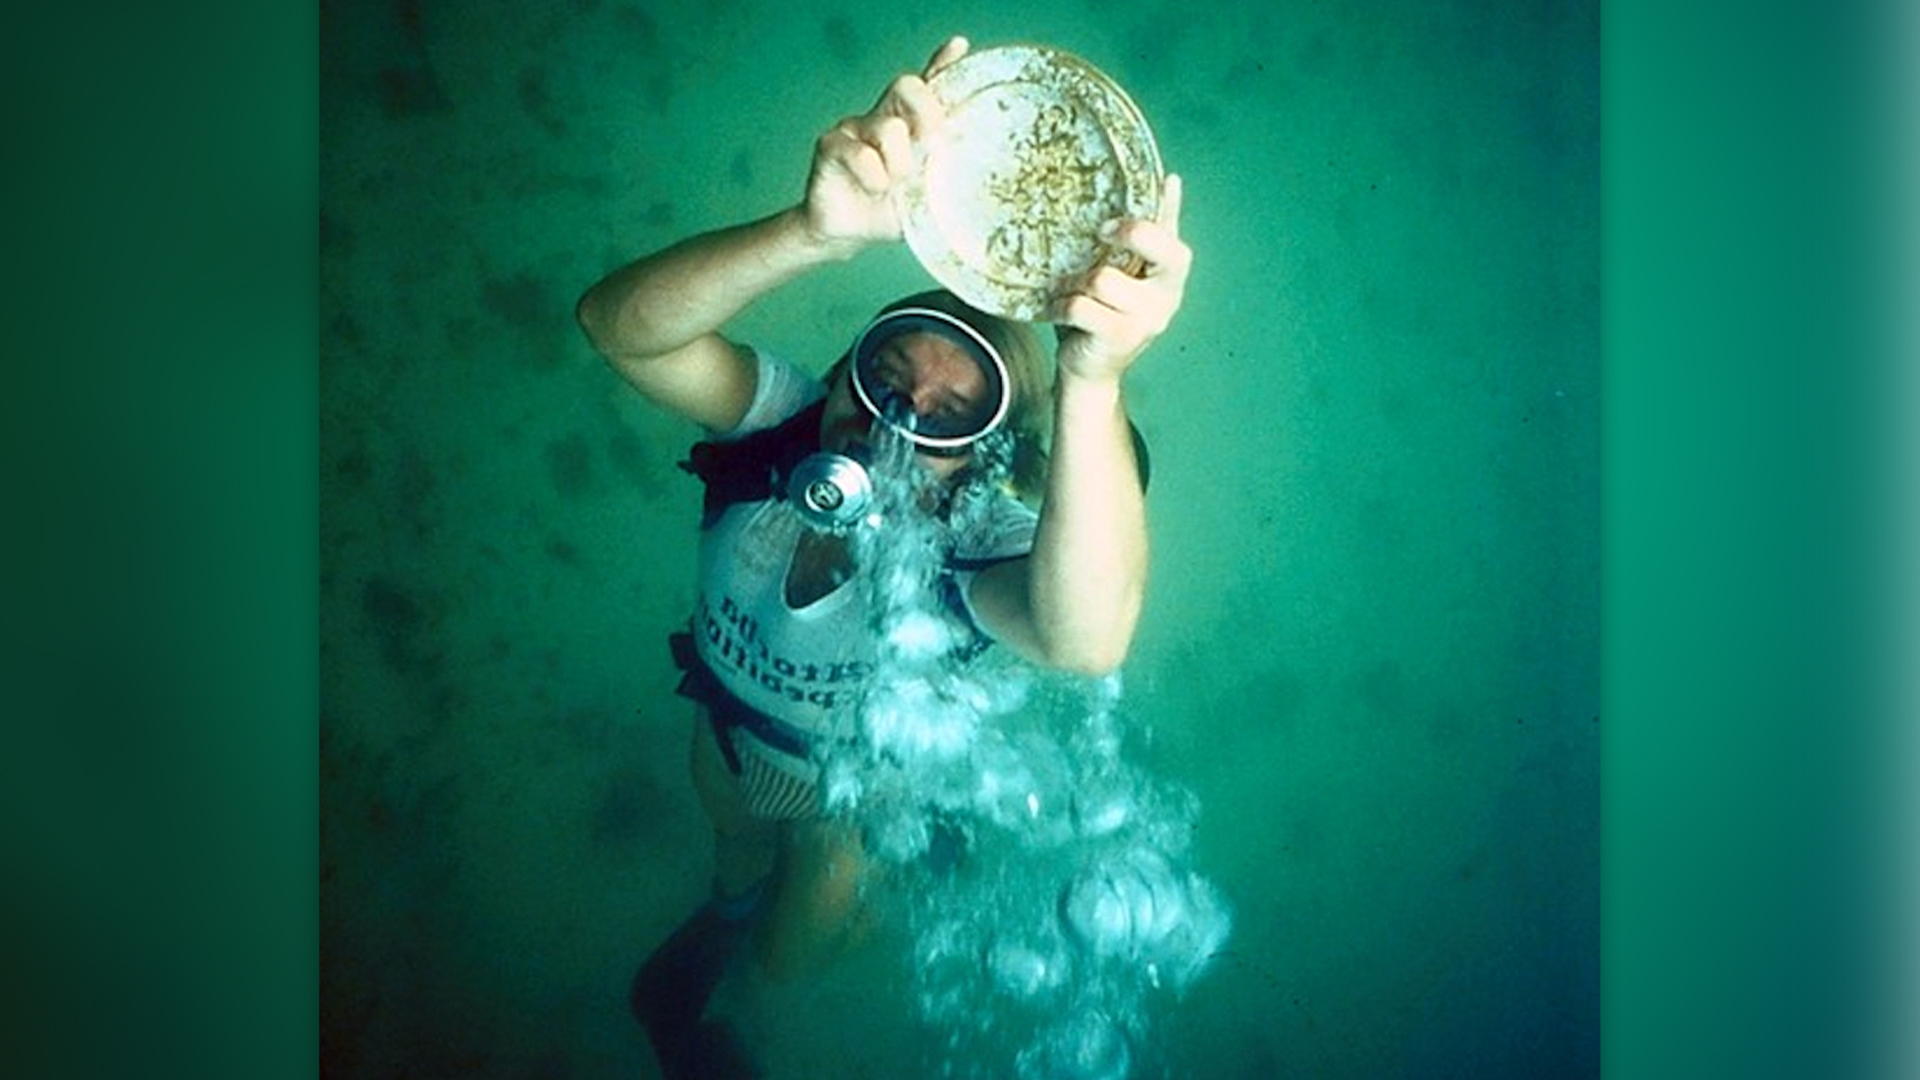 We see a diver holding a metal plate and swimming upwards, with a bubble coming out of his mouth.